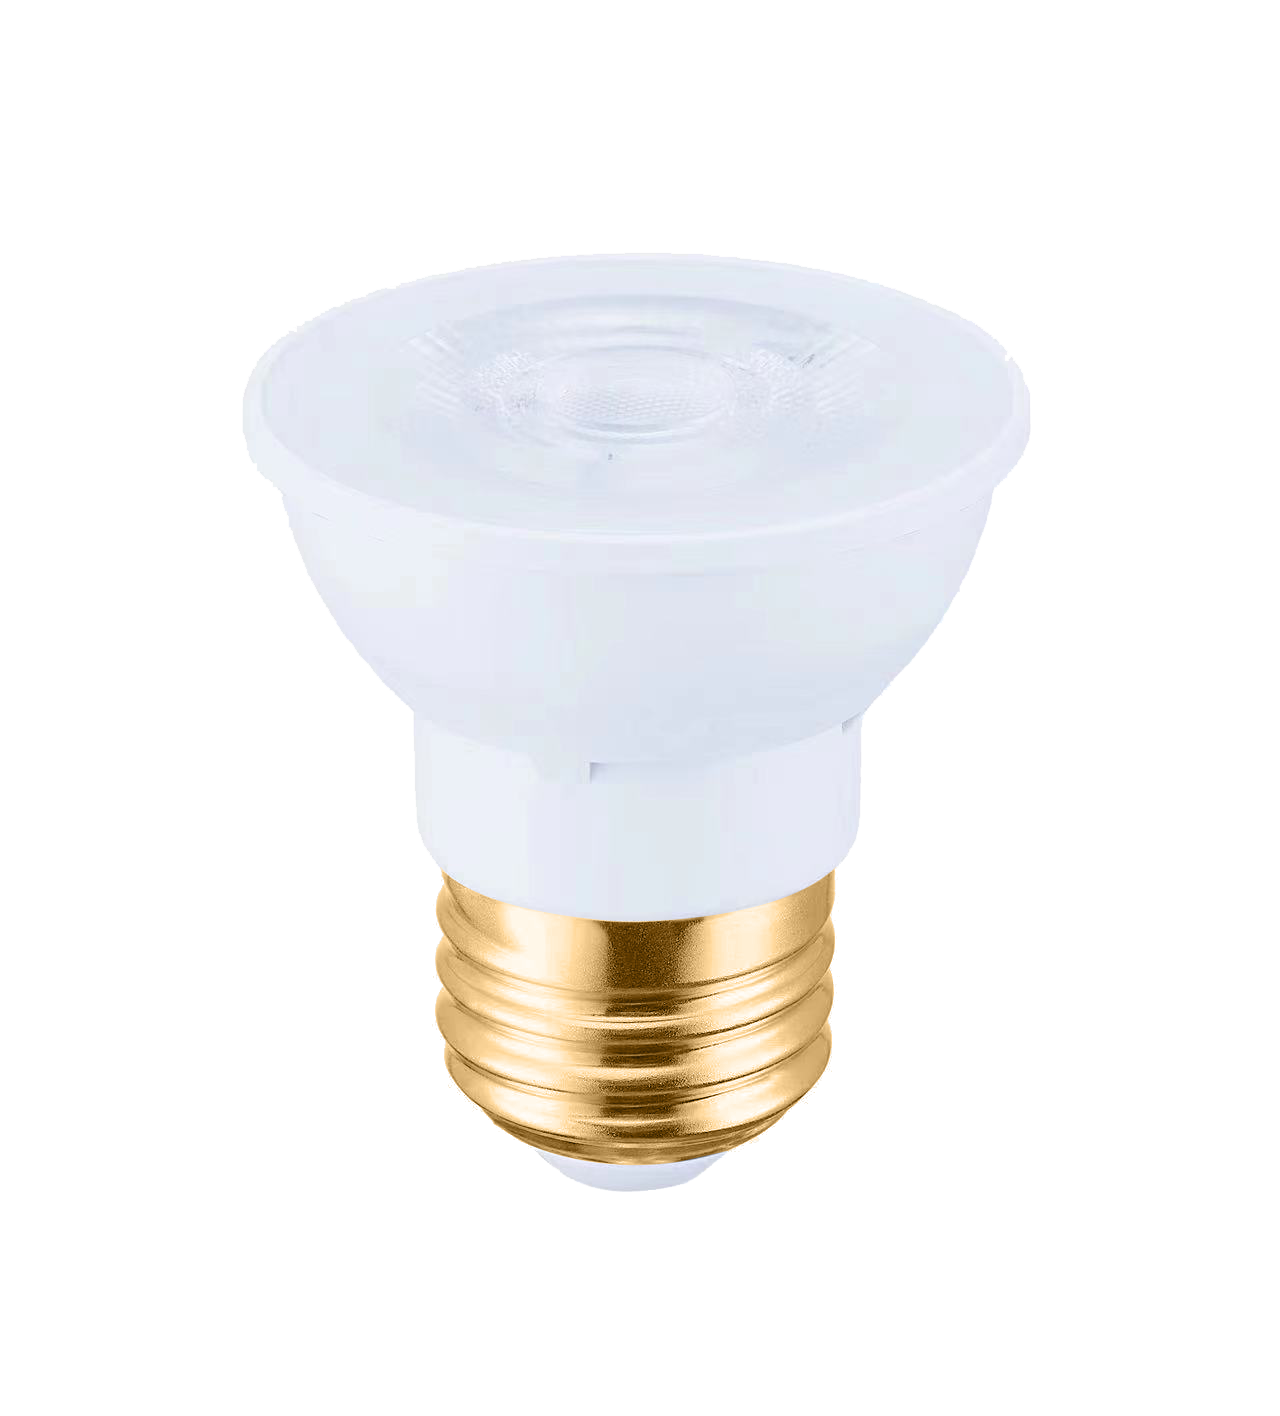 GoodBulb PAR16 LEDs with warm, comfortable spectrum of light. Can last for 25,000 hours and is dimmable.